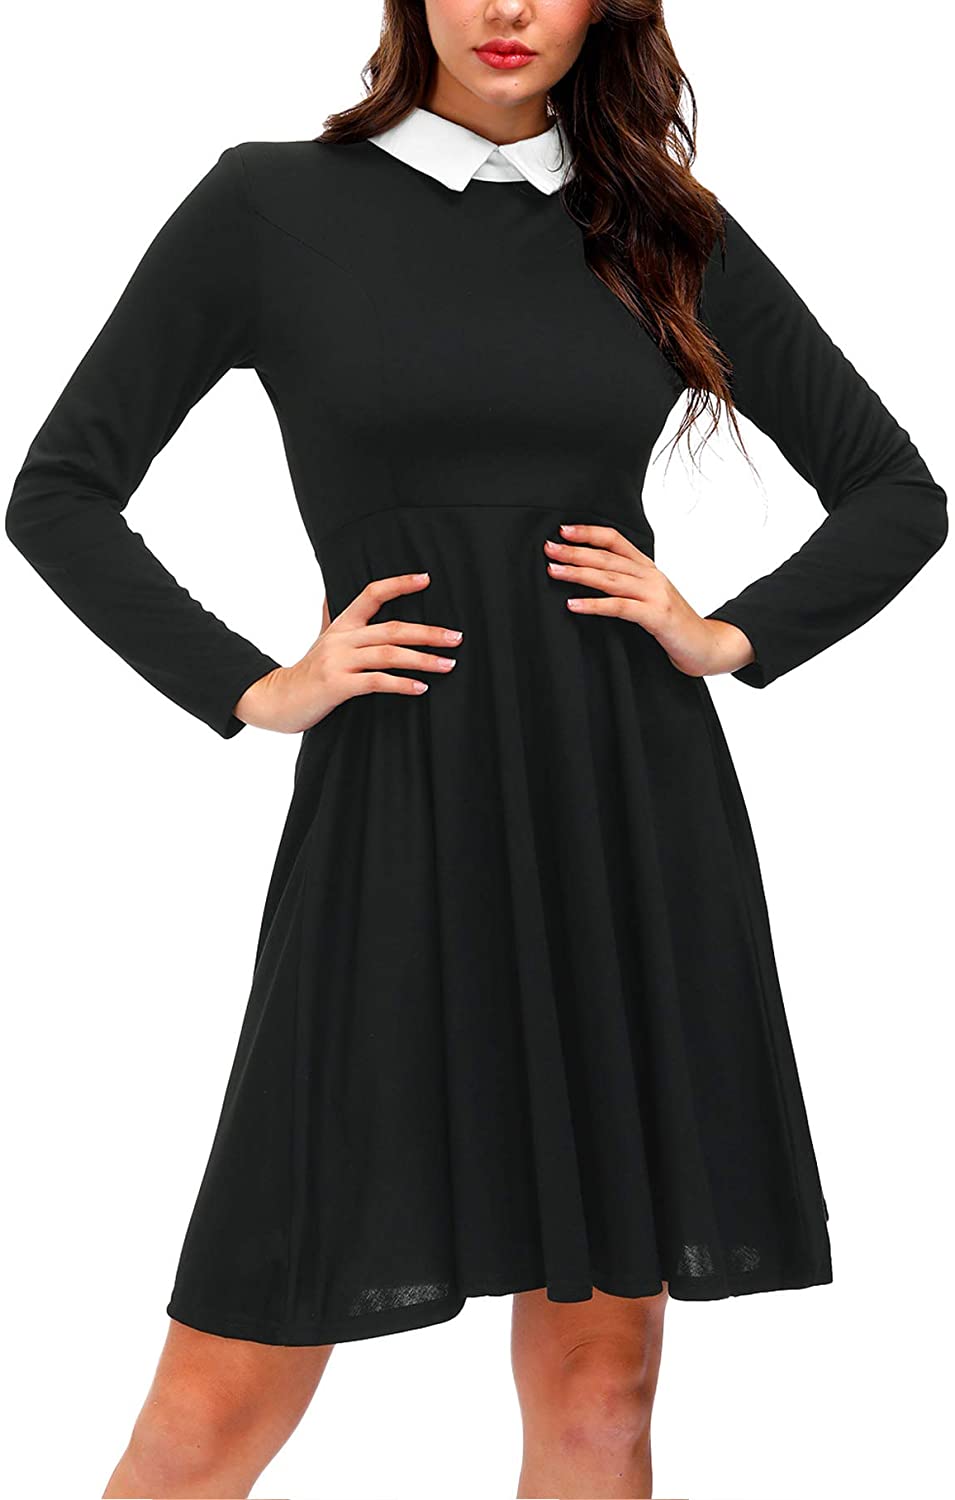 For G and PL Halloween Women's Wednesday Addams Peter Pan Collar Flare ...